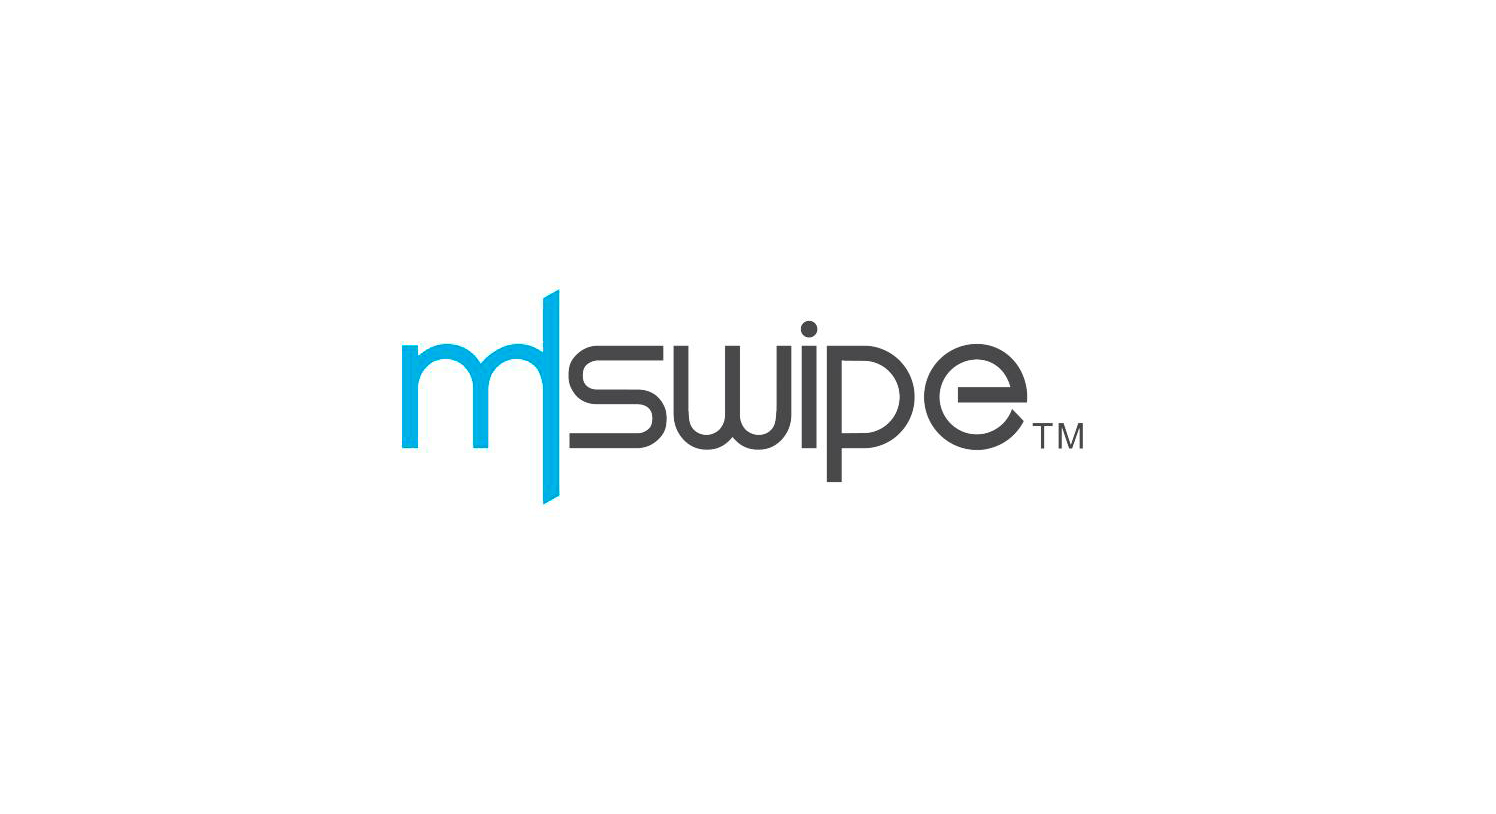 Pay By Link Transactions in Contactless Payments Grow 6X in the Second Wave of Pandemic; Reveals Mswipe 